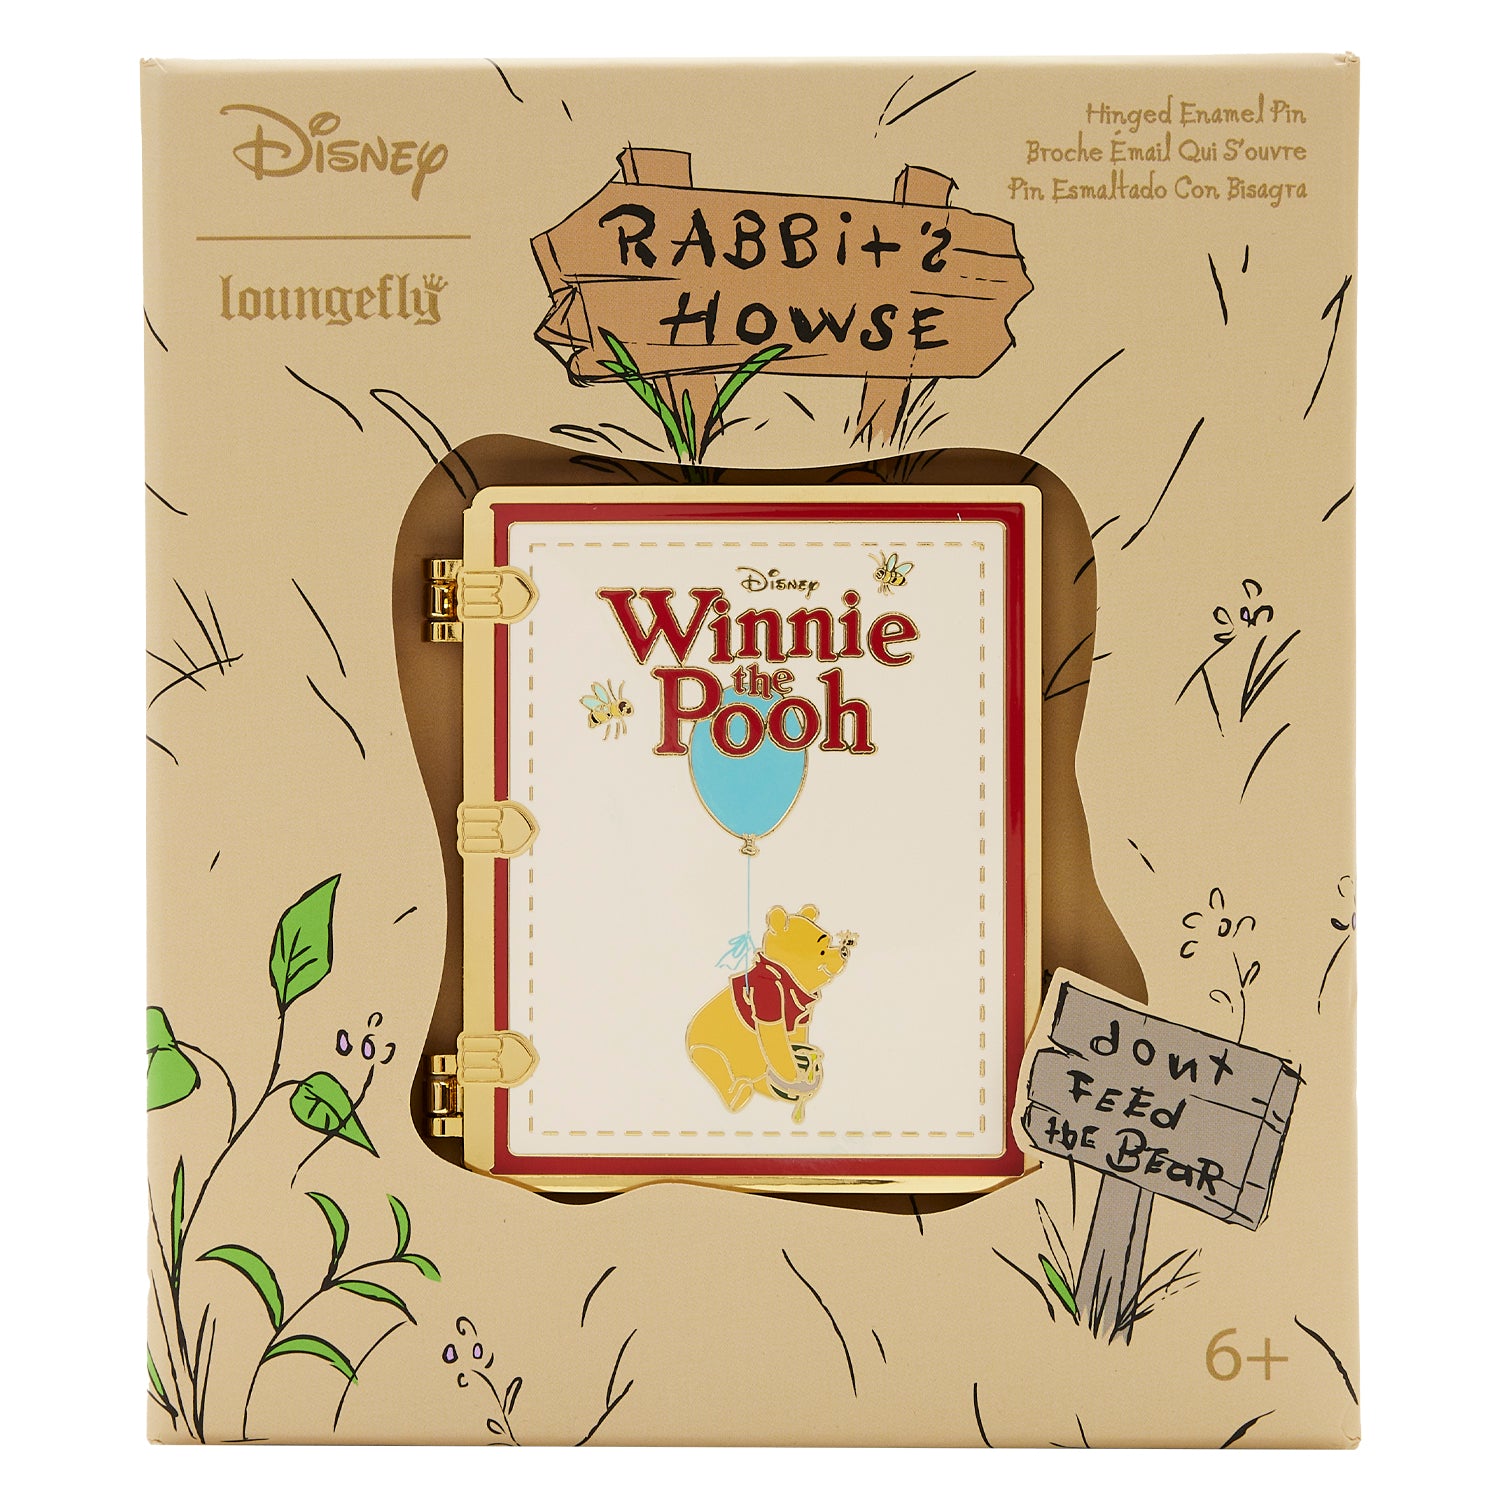 Disney Winnie The Pooh Classic Book 3-Inch Collector Pin